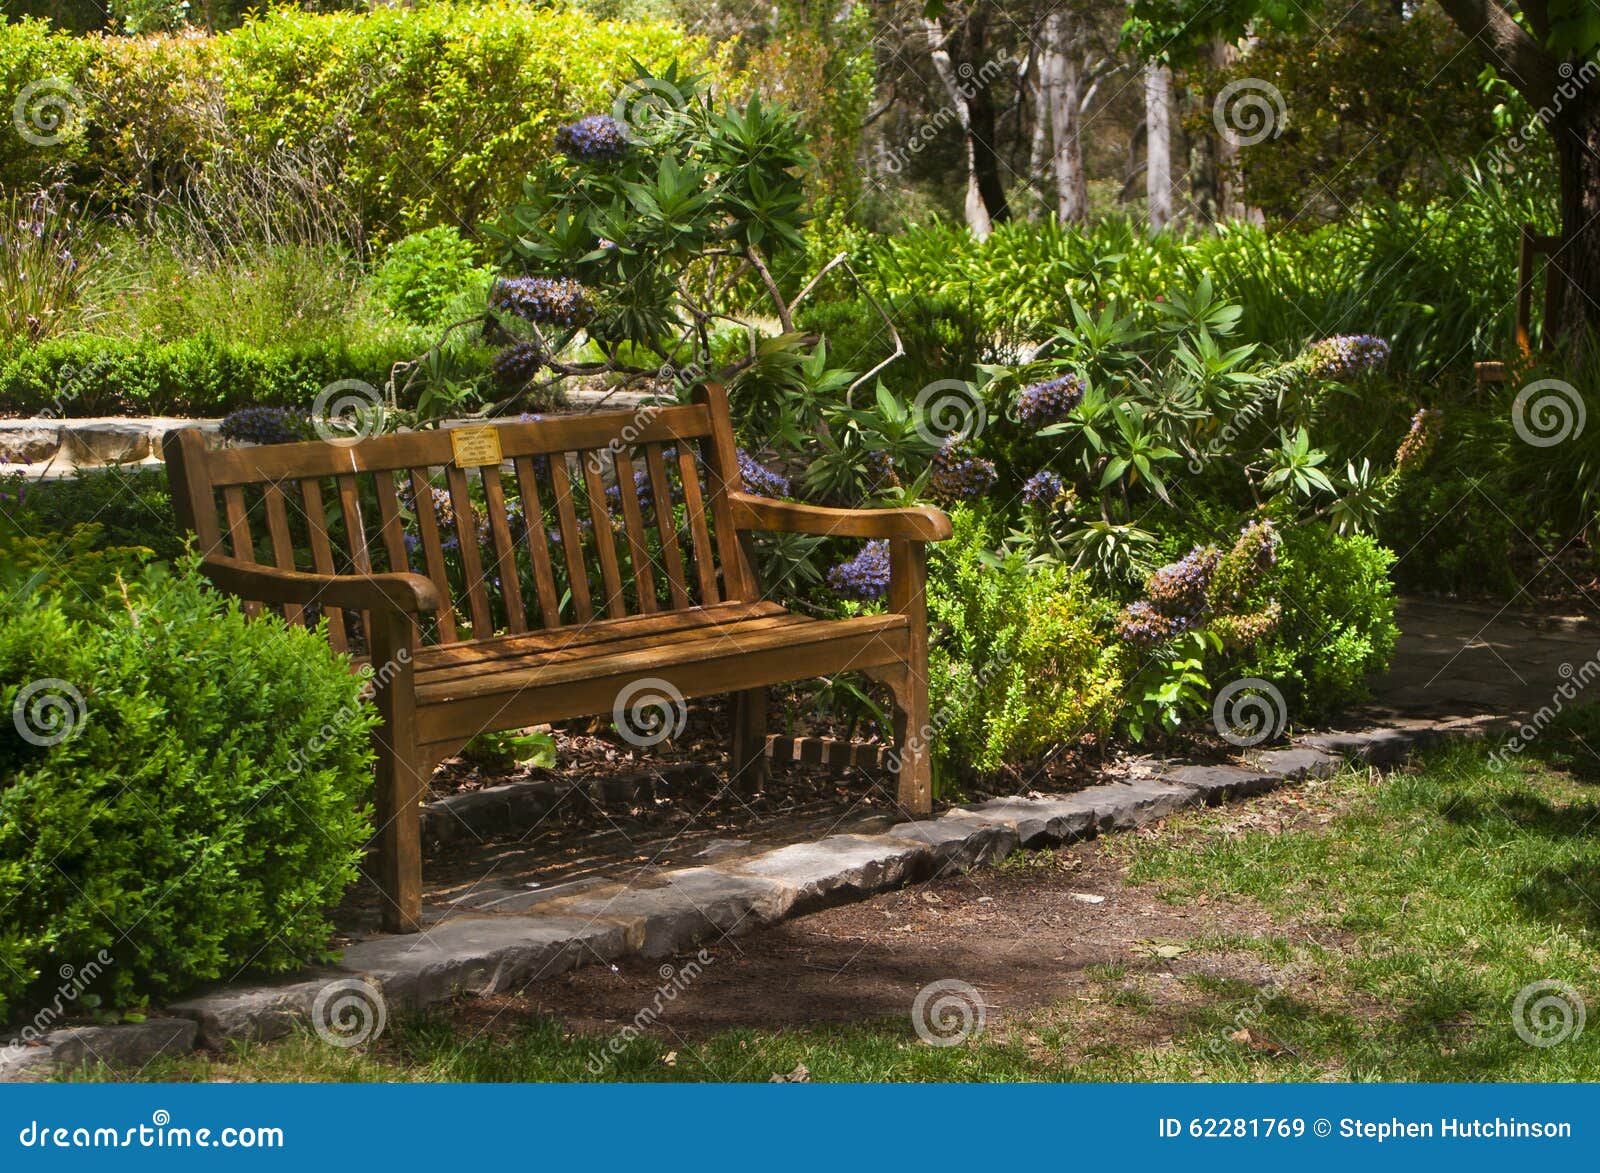 bench among the flower bed stock image. image of rose - 62281769